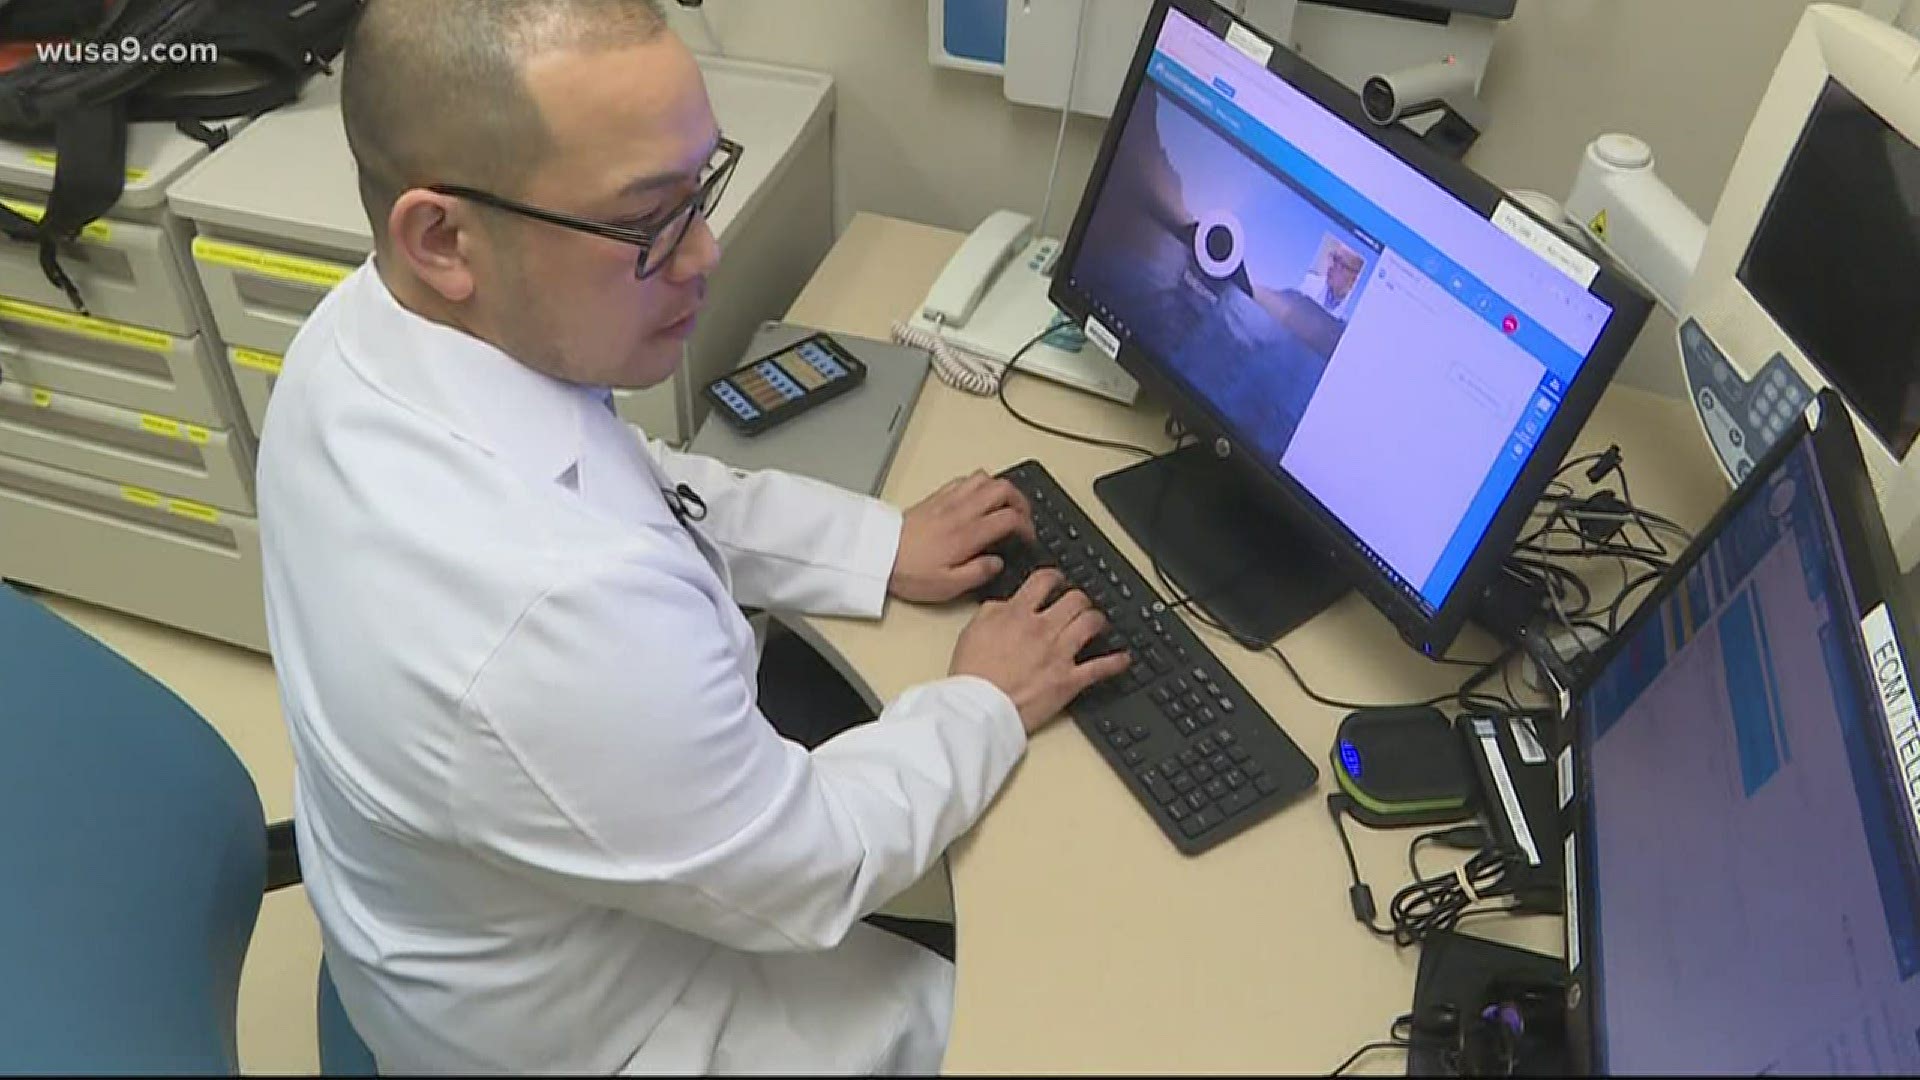 Telemedicine has been on the rise for years, but the coronavirus outbreak has made it critical.